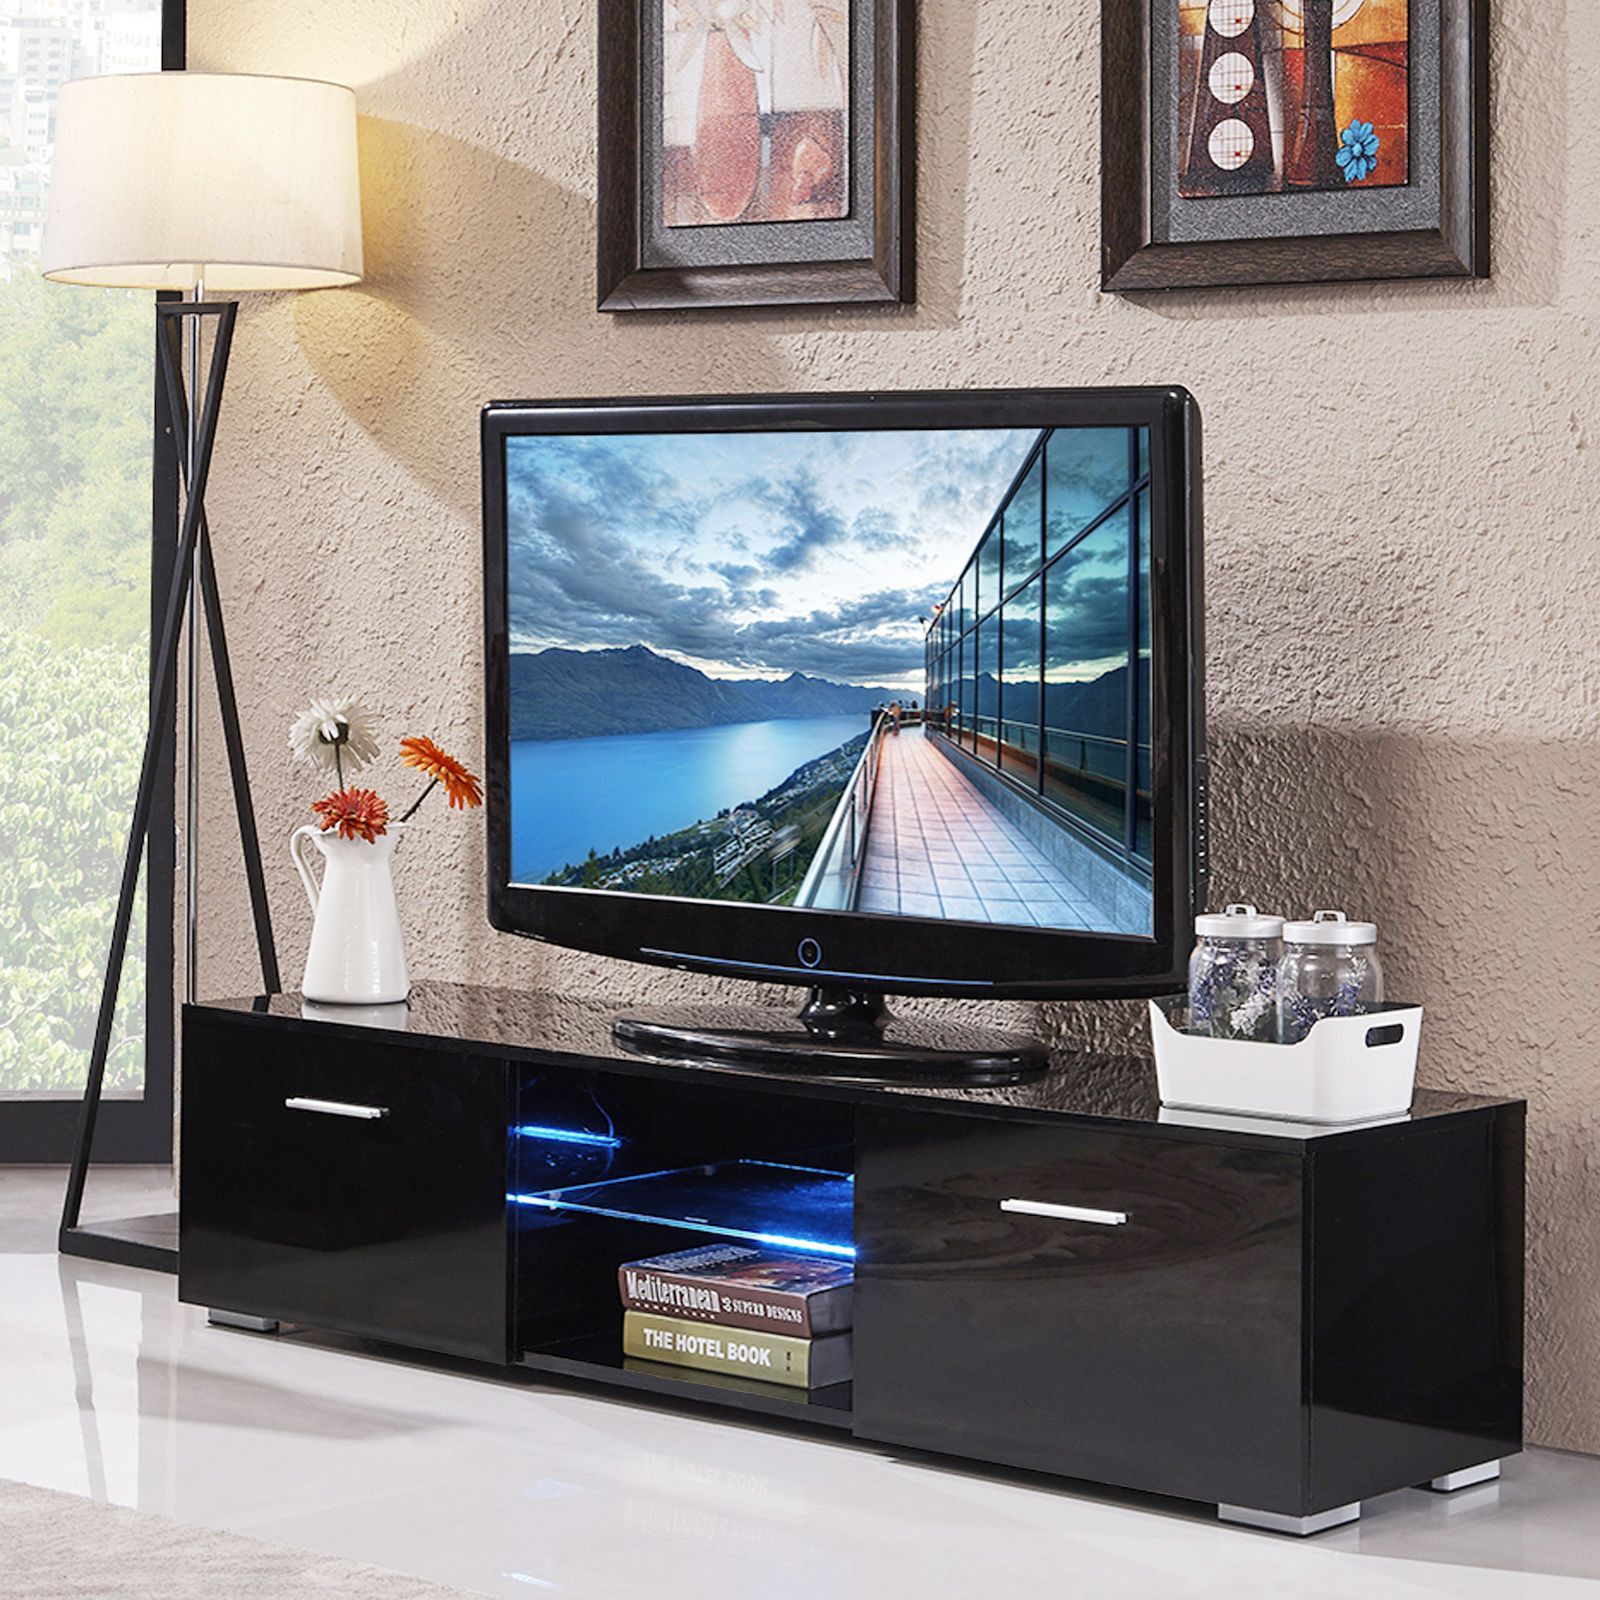 High Gloss Tv Stand Unit Cabinet Console Furniture W/led With Regard To Modern High Gloss Tv Units (View 2 of 15)